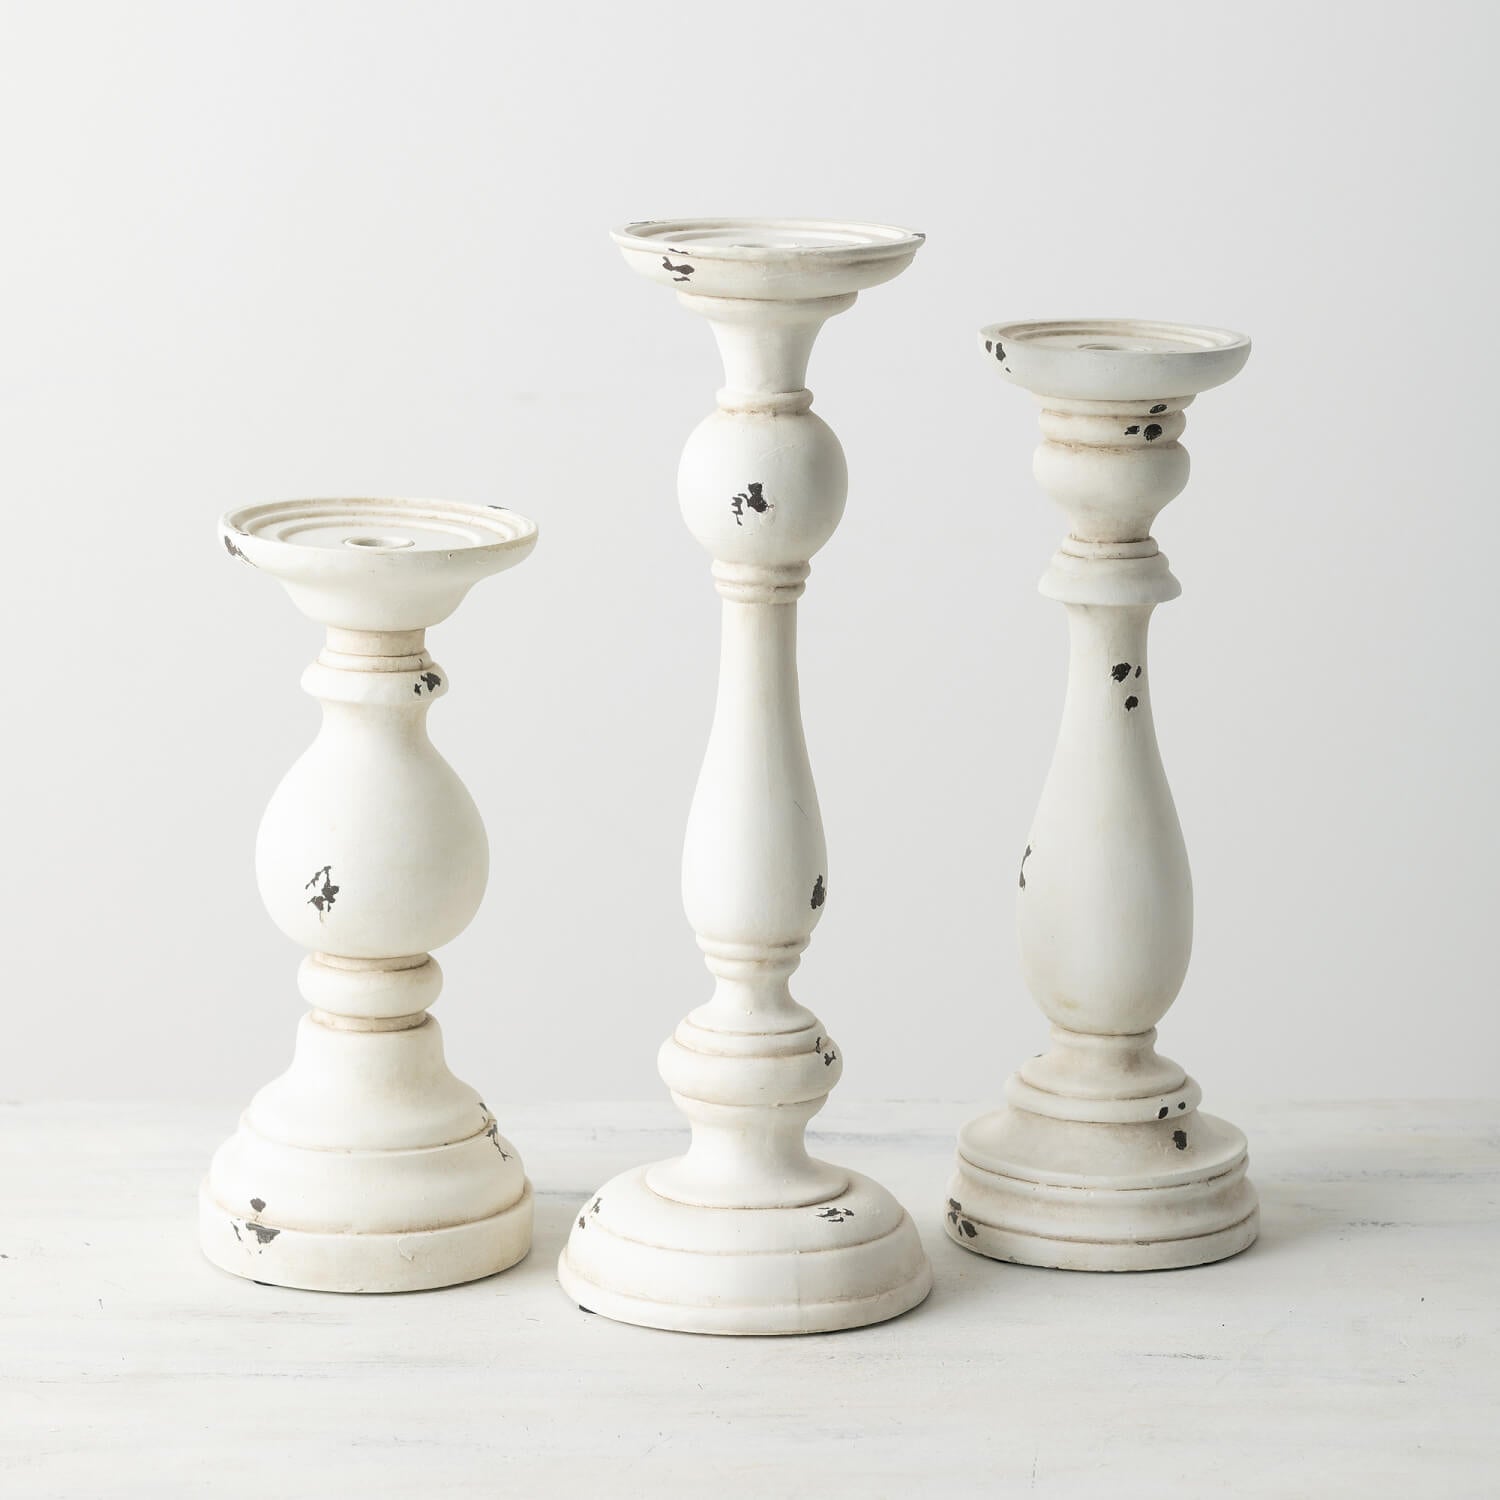 Pillar Candle Holder Set of 3 - Online Only